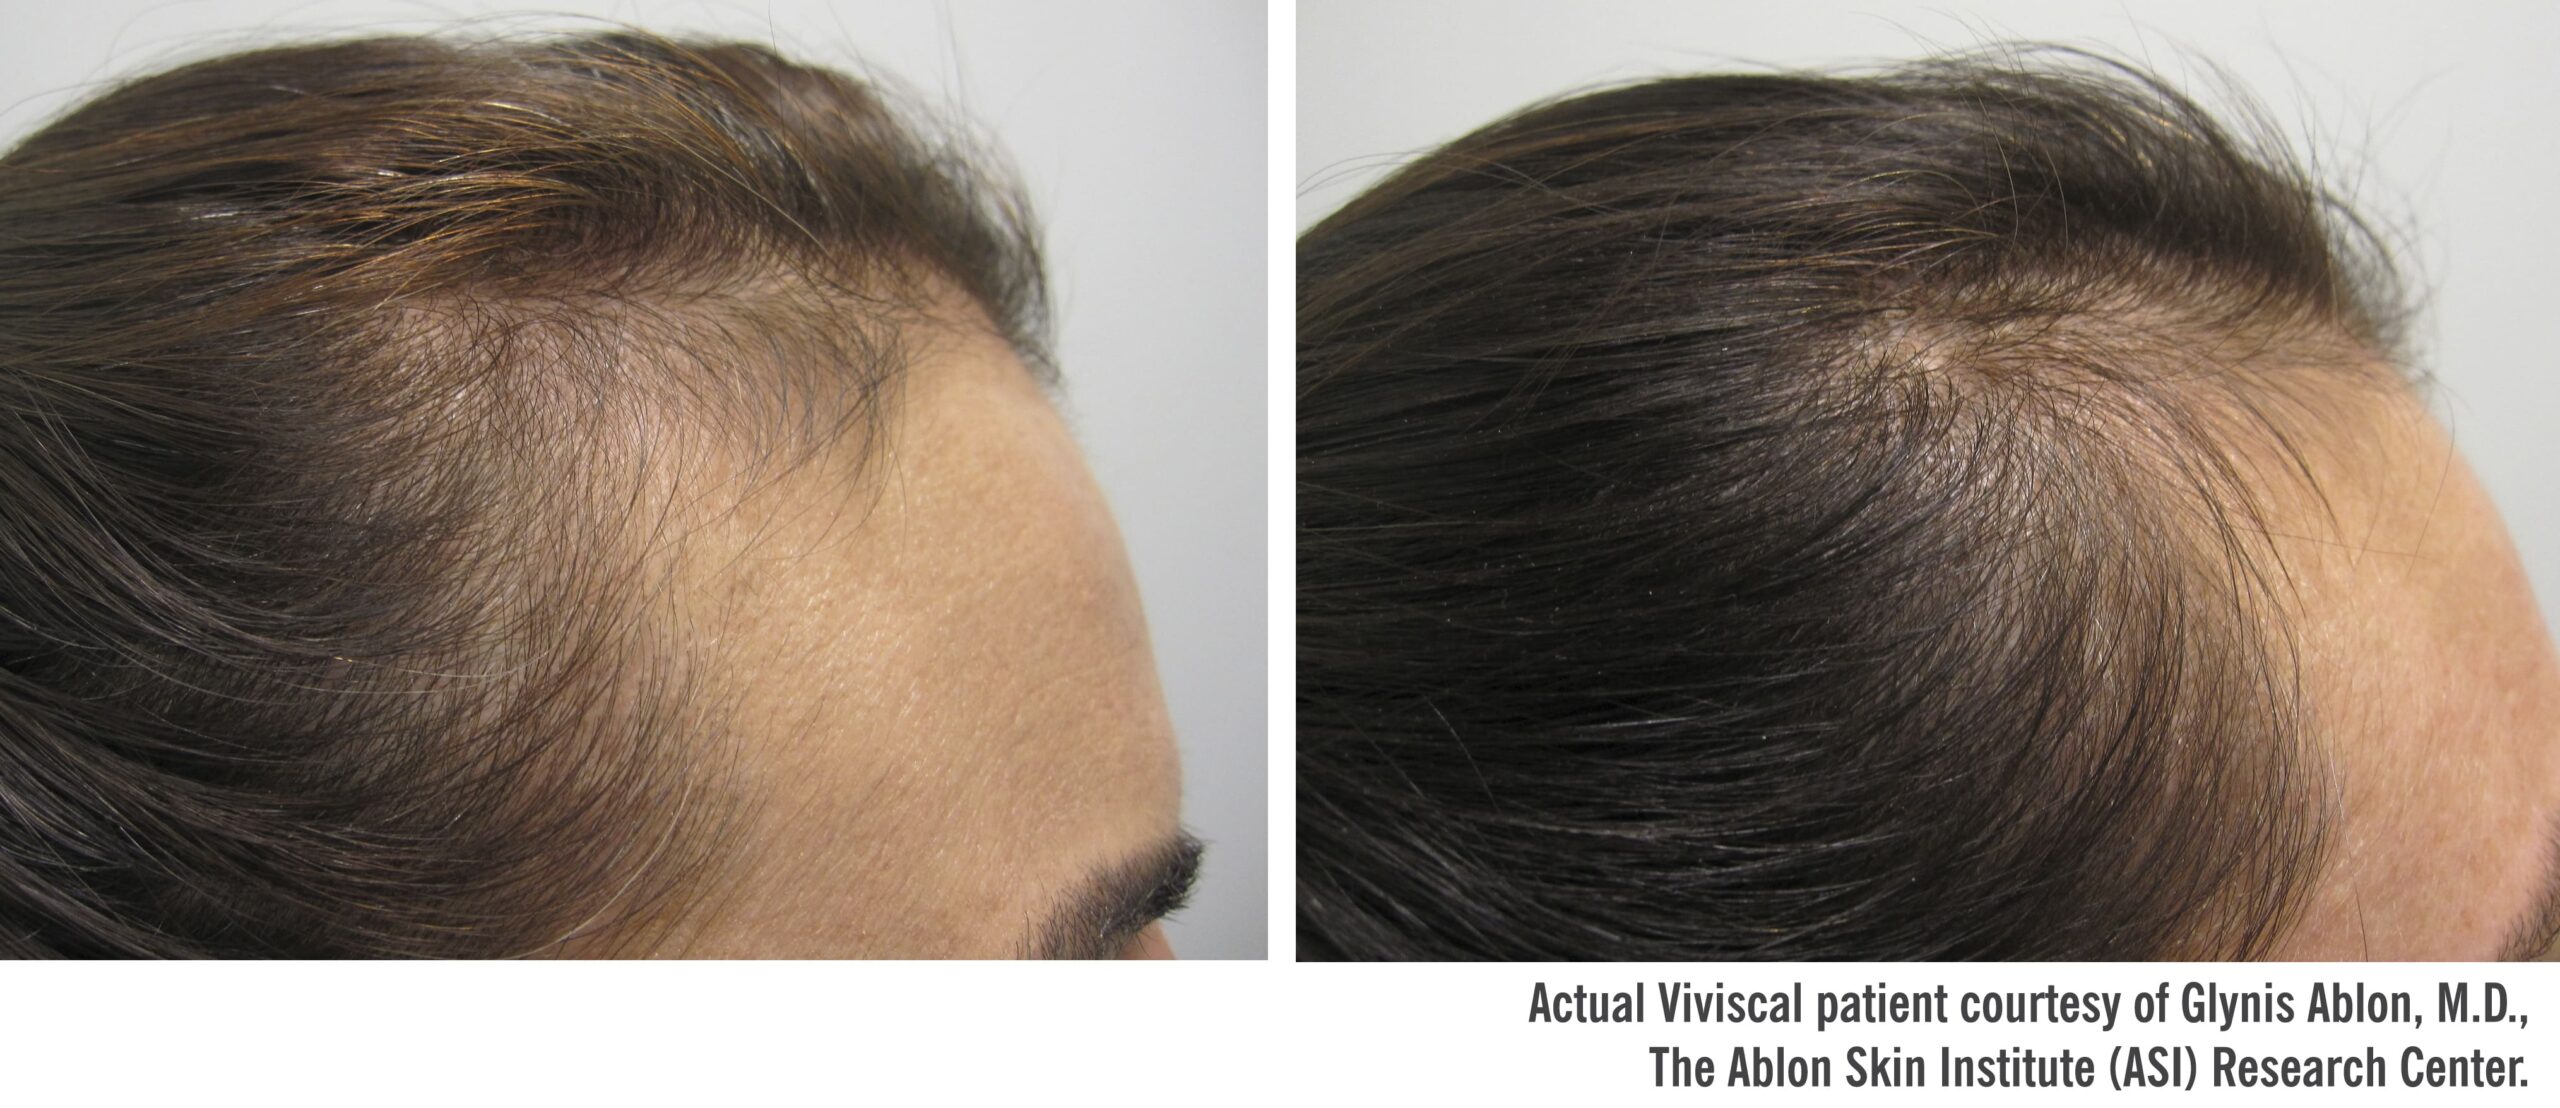 Viviscal - Before & After 90 Day - 6_71093206-4537-4c89-819e-0548632ce567